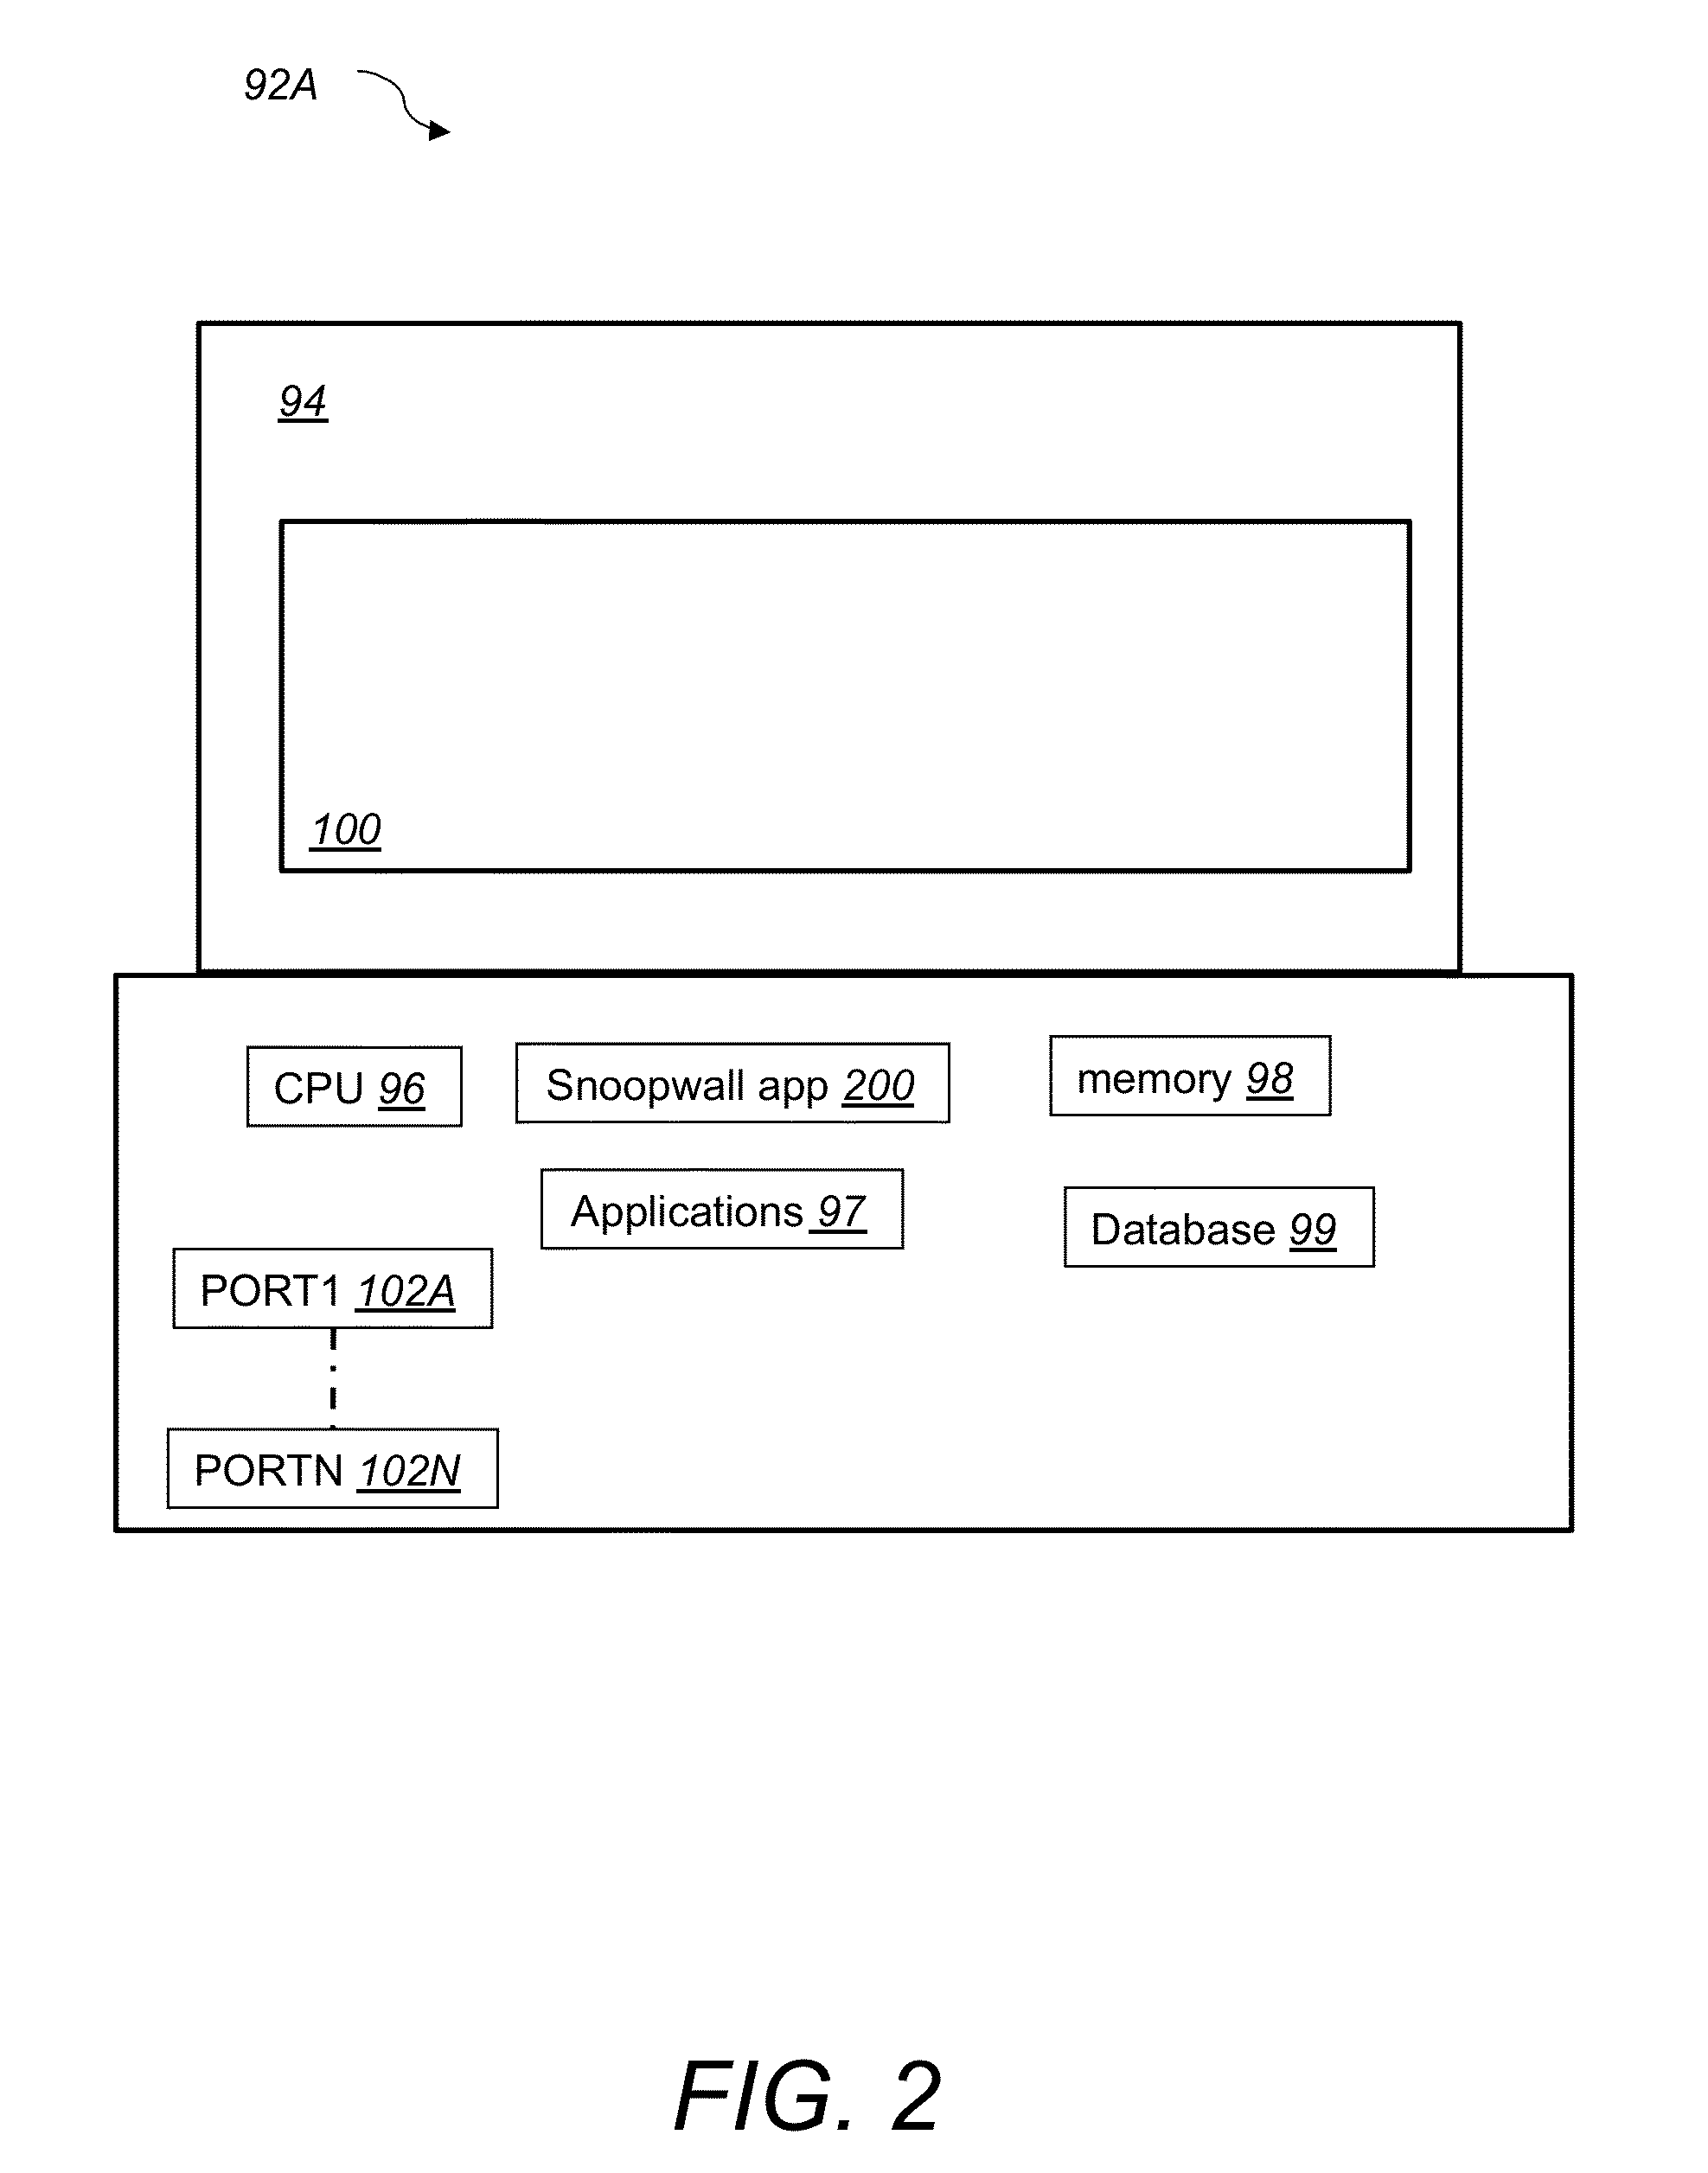 System and method for detecting, alerting and blocking data leakage, eavesdropping and spyware